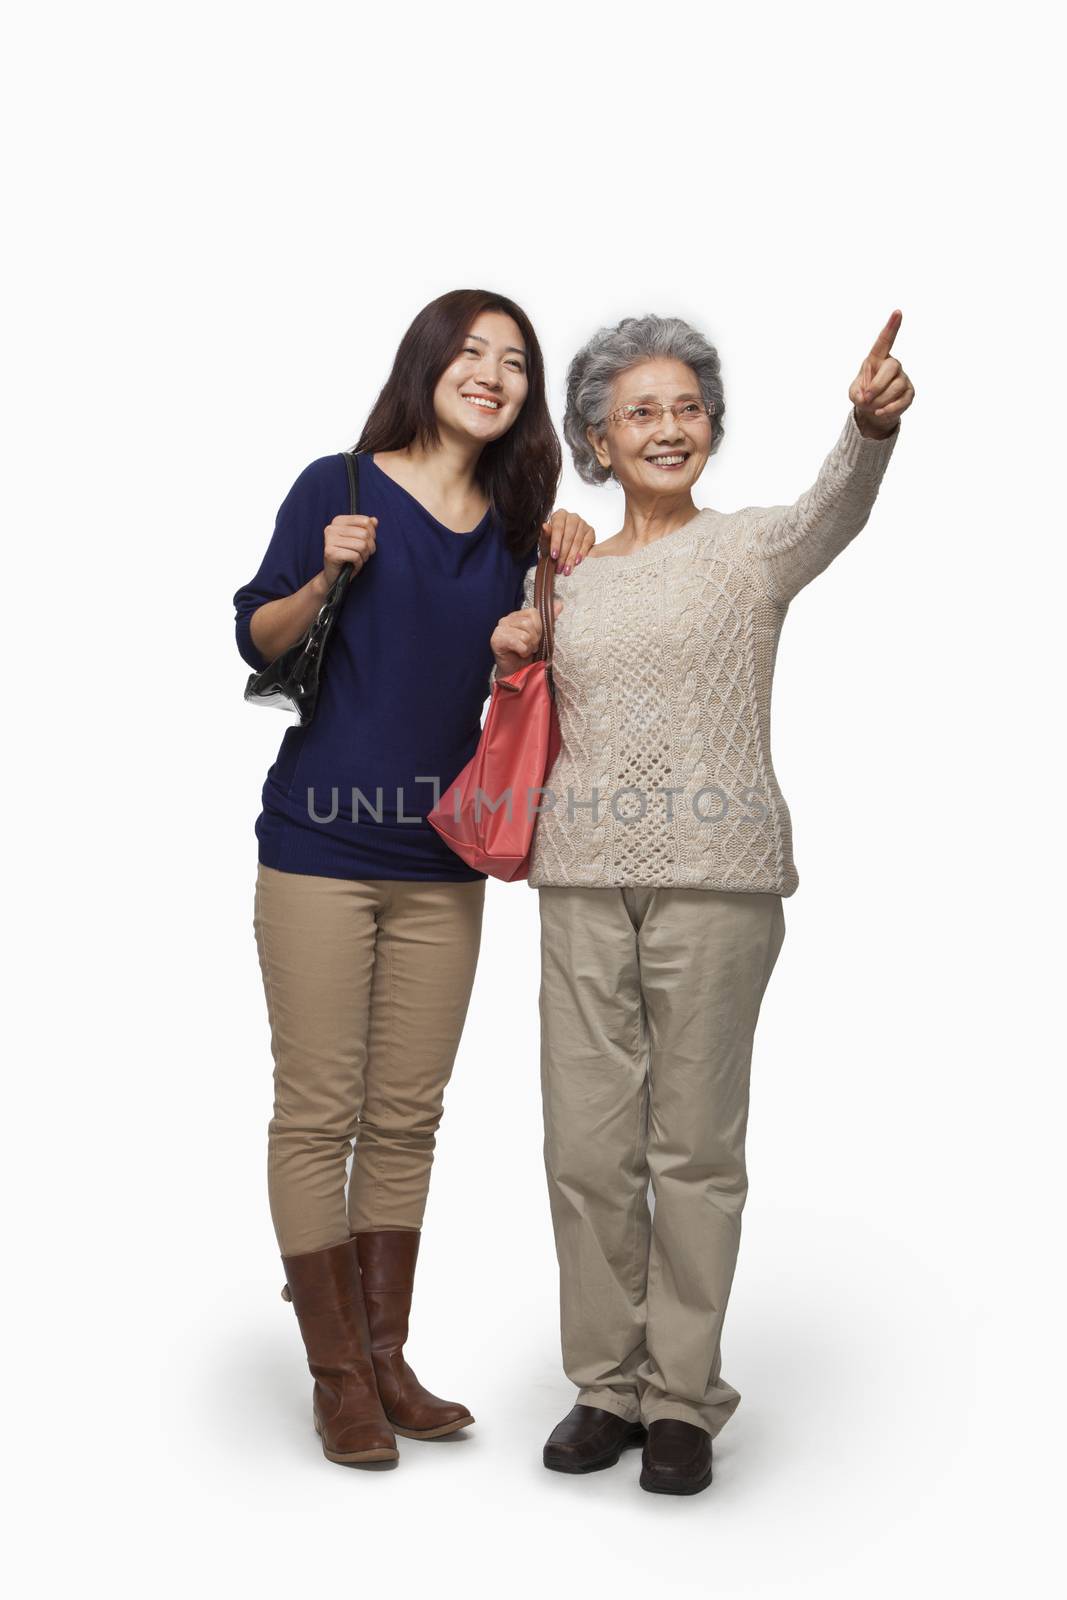 Senior mother and daughter pointing